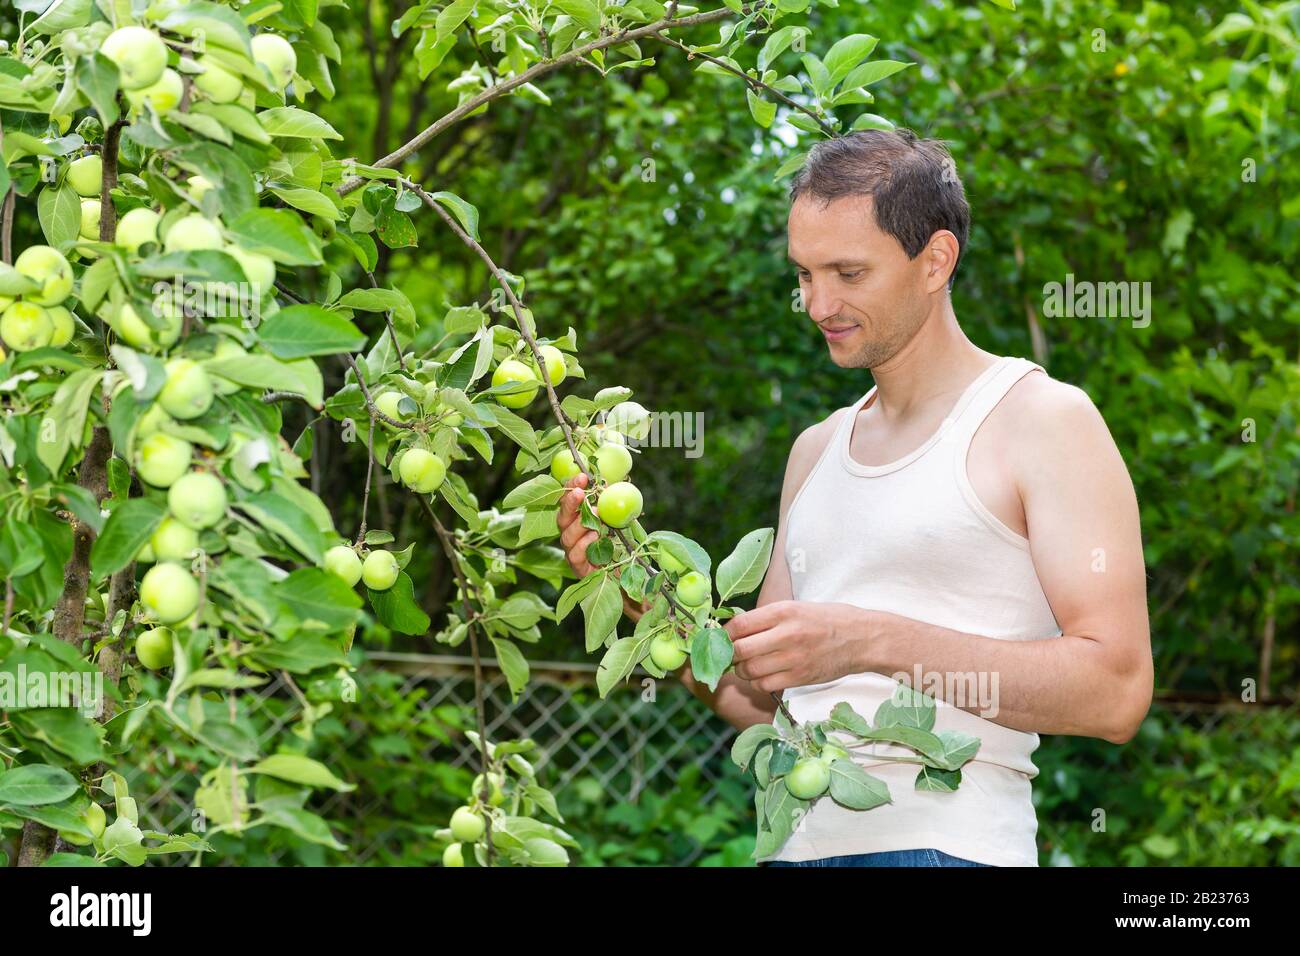 Unripe green apples on tree in Russia or Ukraine garden dacha farm with young man farmer picking holding smiling by fruit Stock Photo